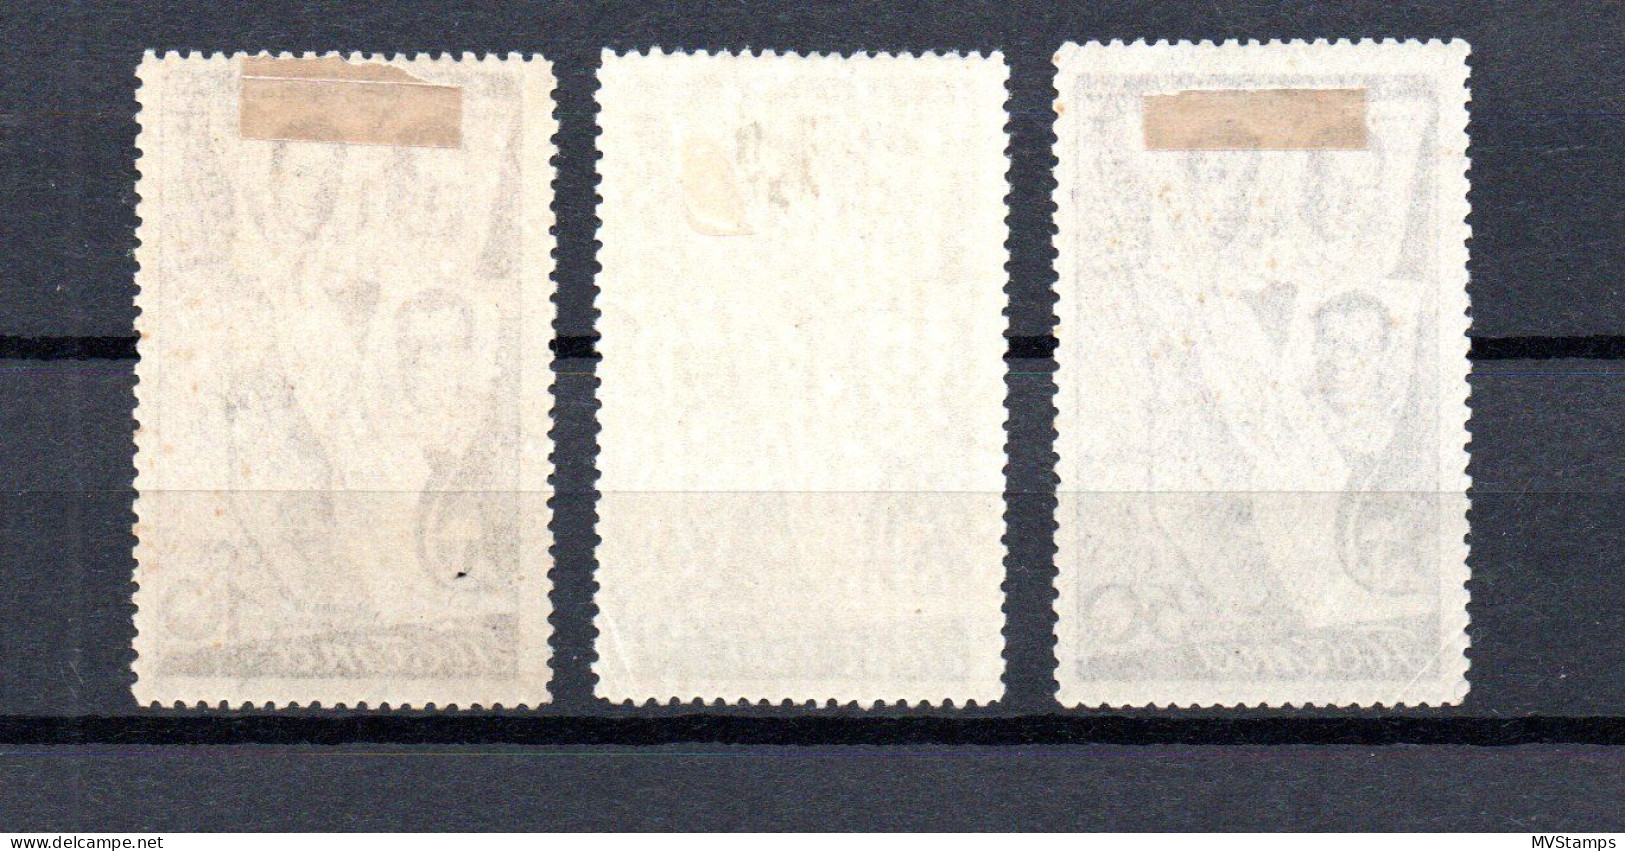 Russia 1938 Old Set Polar-Flight Moscow-San Jacinto Stamps (Michel 599/601) MLH - Ungebraucht